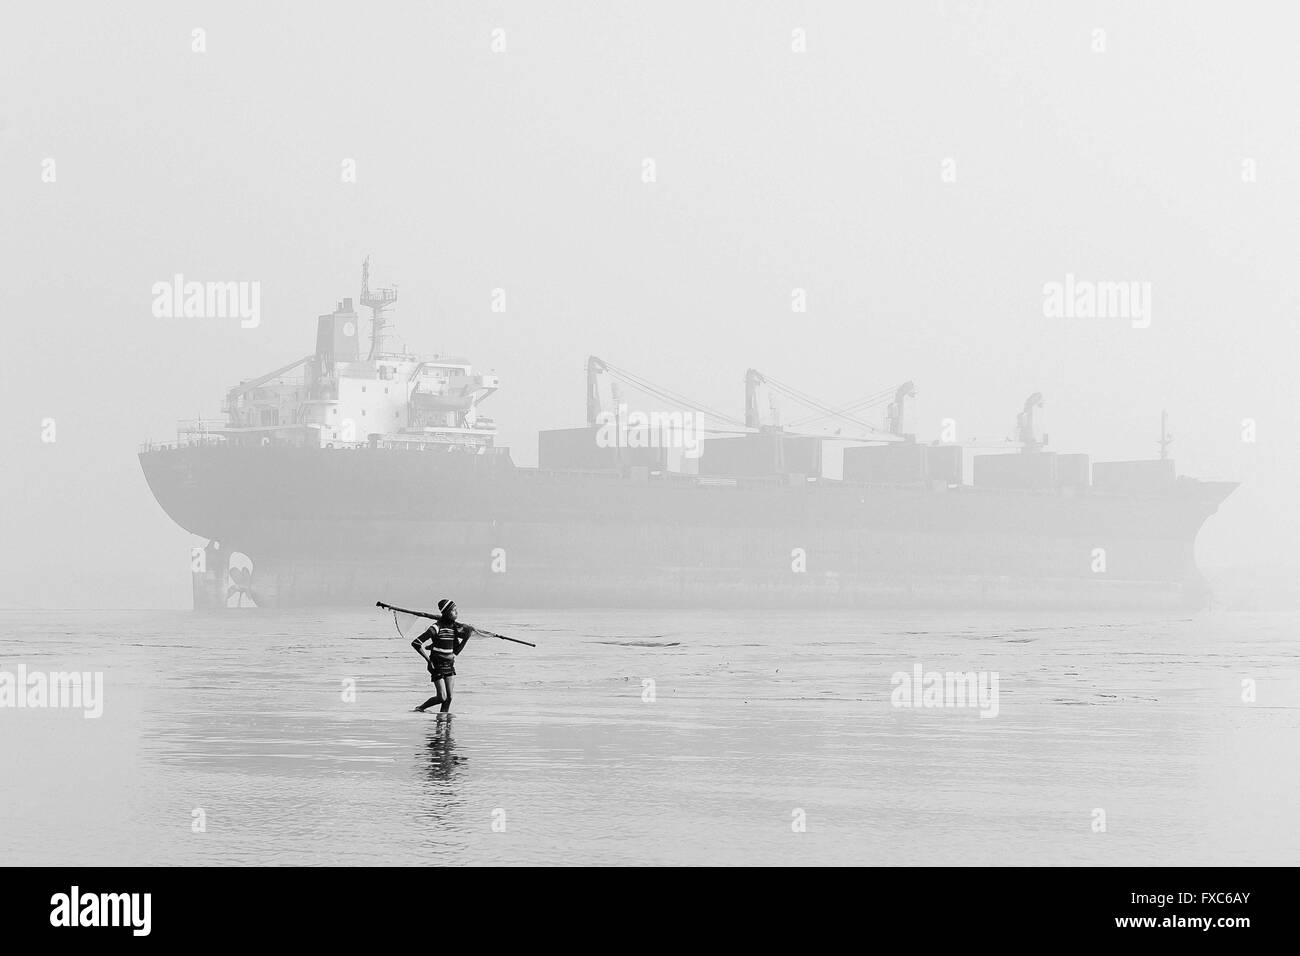 A boy goes with a hand net at dawn between the shipbreaking places of Chittagong in Bangladesh for fishing. Every morning, fishermen in Chittagong go with their boats to contaminated fishing spots in the middle of one of the largest shipbreaking places in the world. Stock Photo